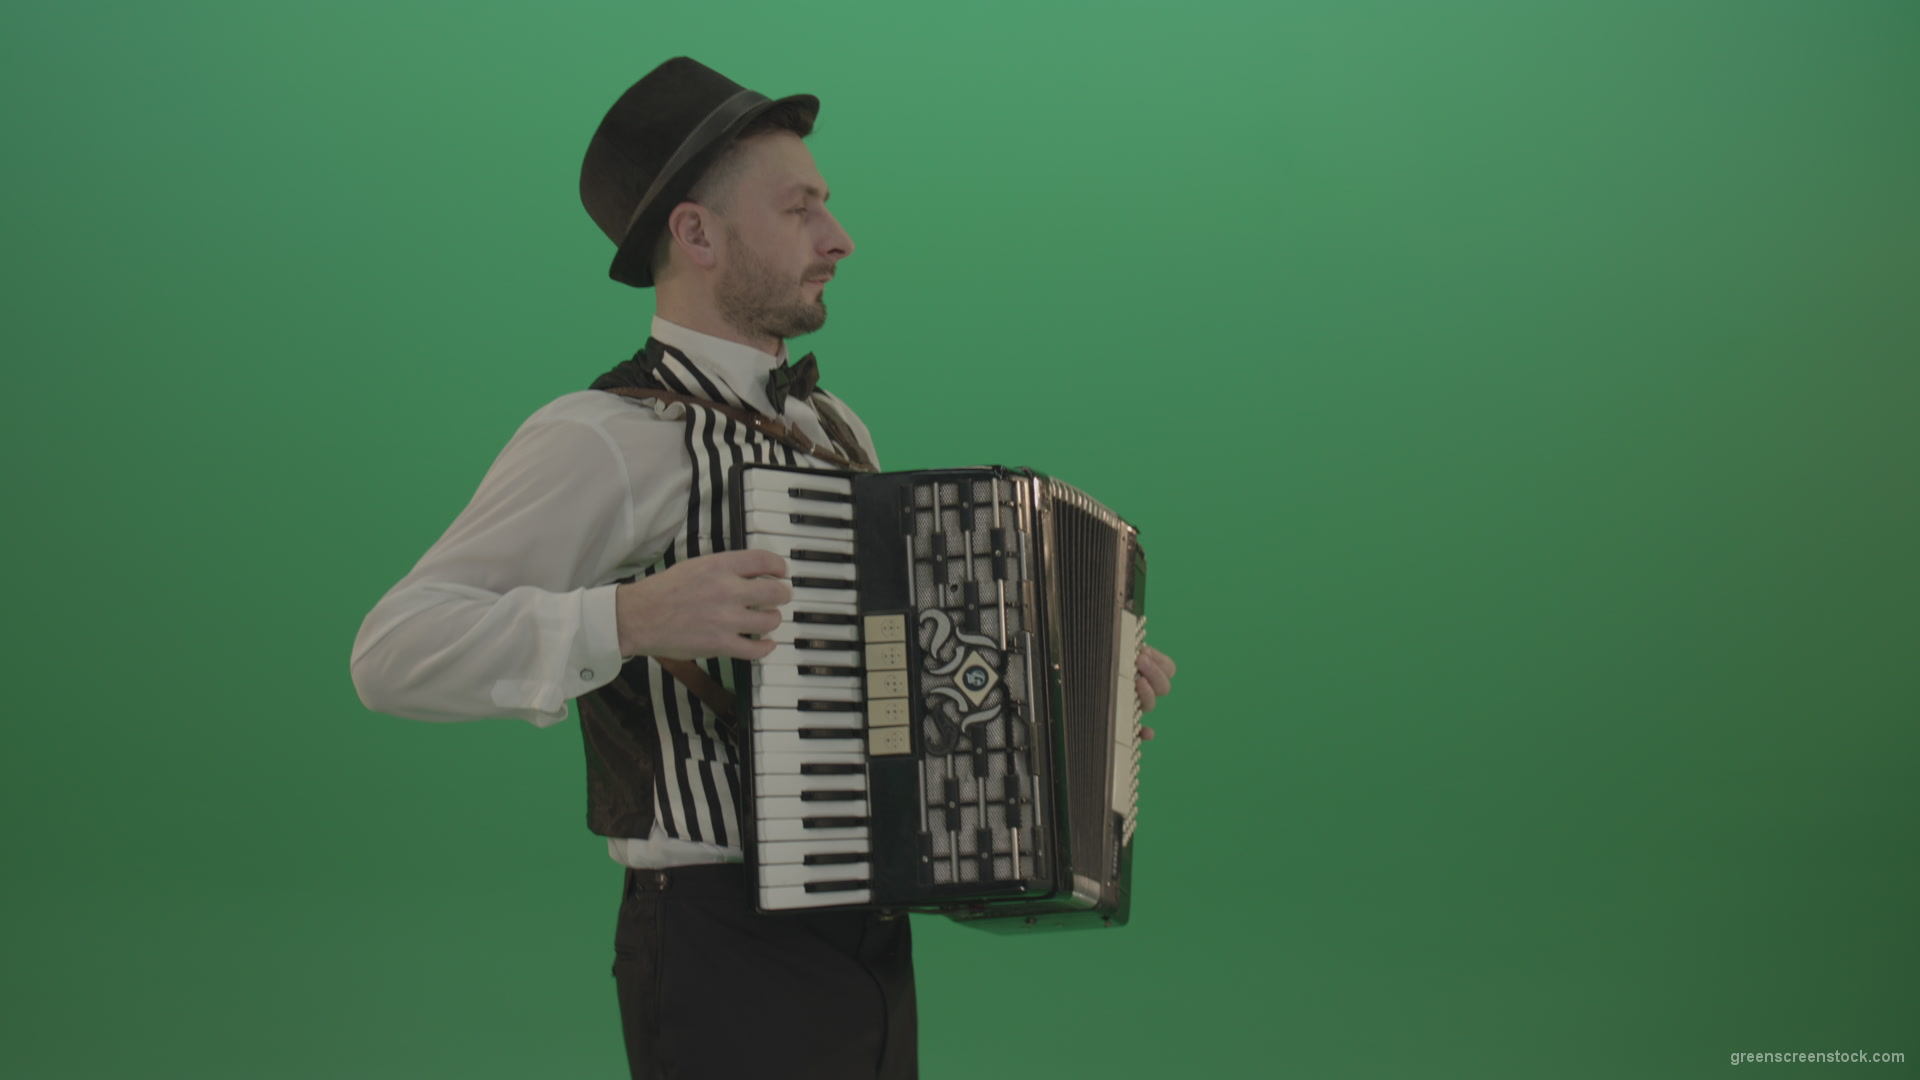 Man-in-hat-playing-Accordion-jazz-music-on-wedding-in-side-view-isolated-on-green-screen_009 Green Screen Stock